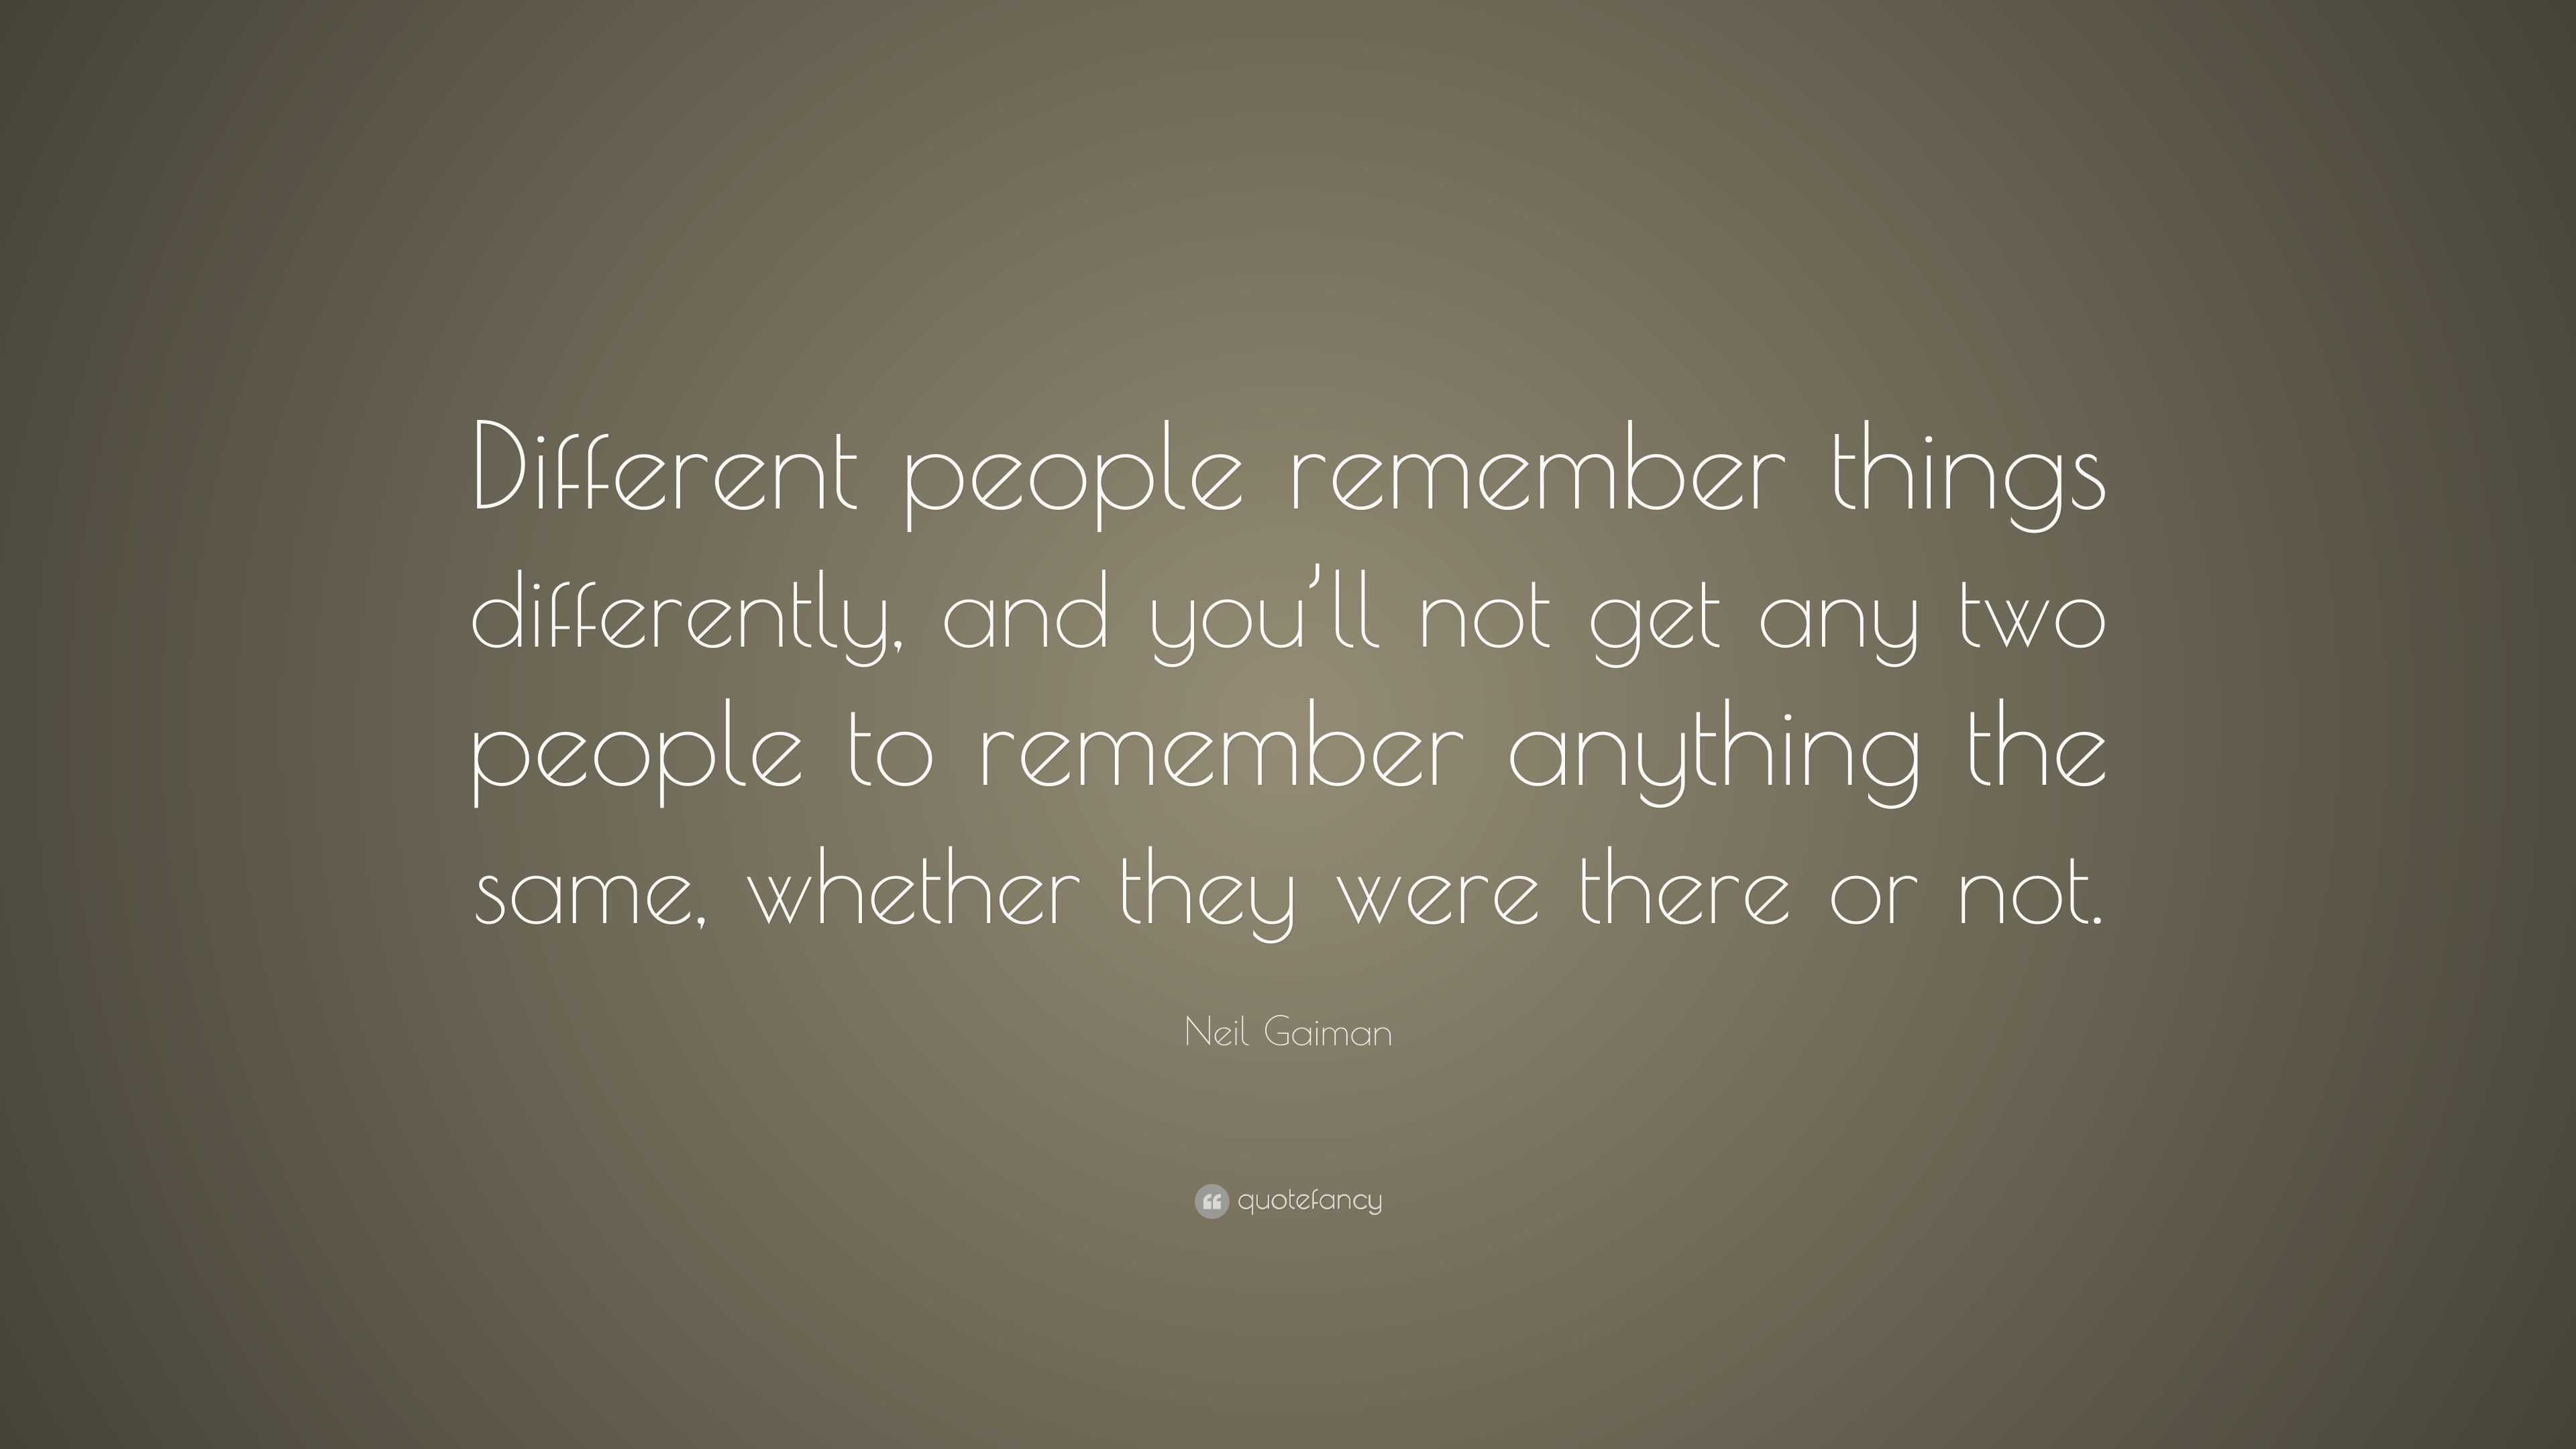 Neil Gaiman Quote: “Different people remember things differently, and ...